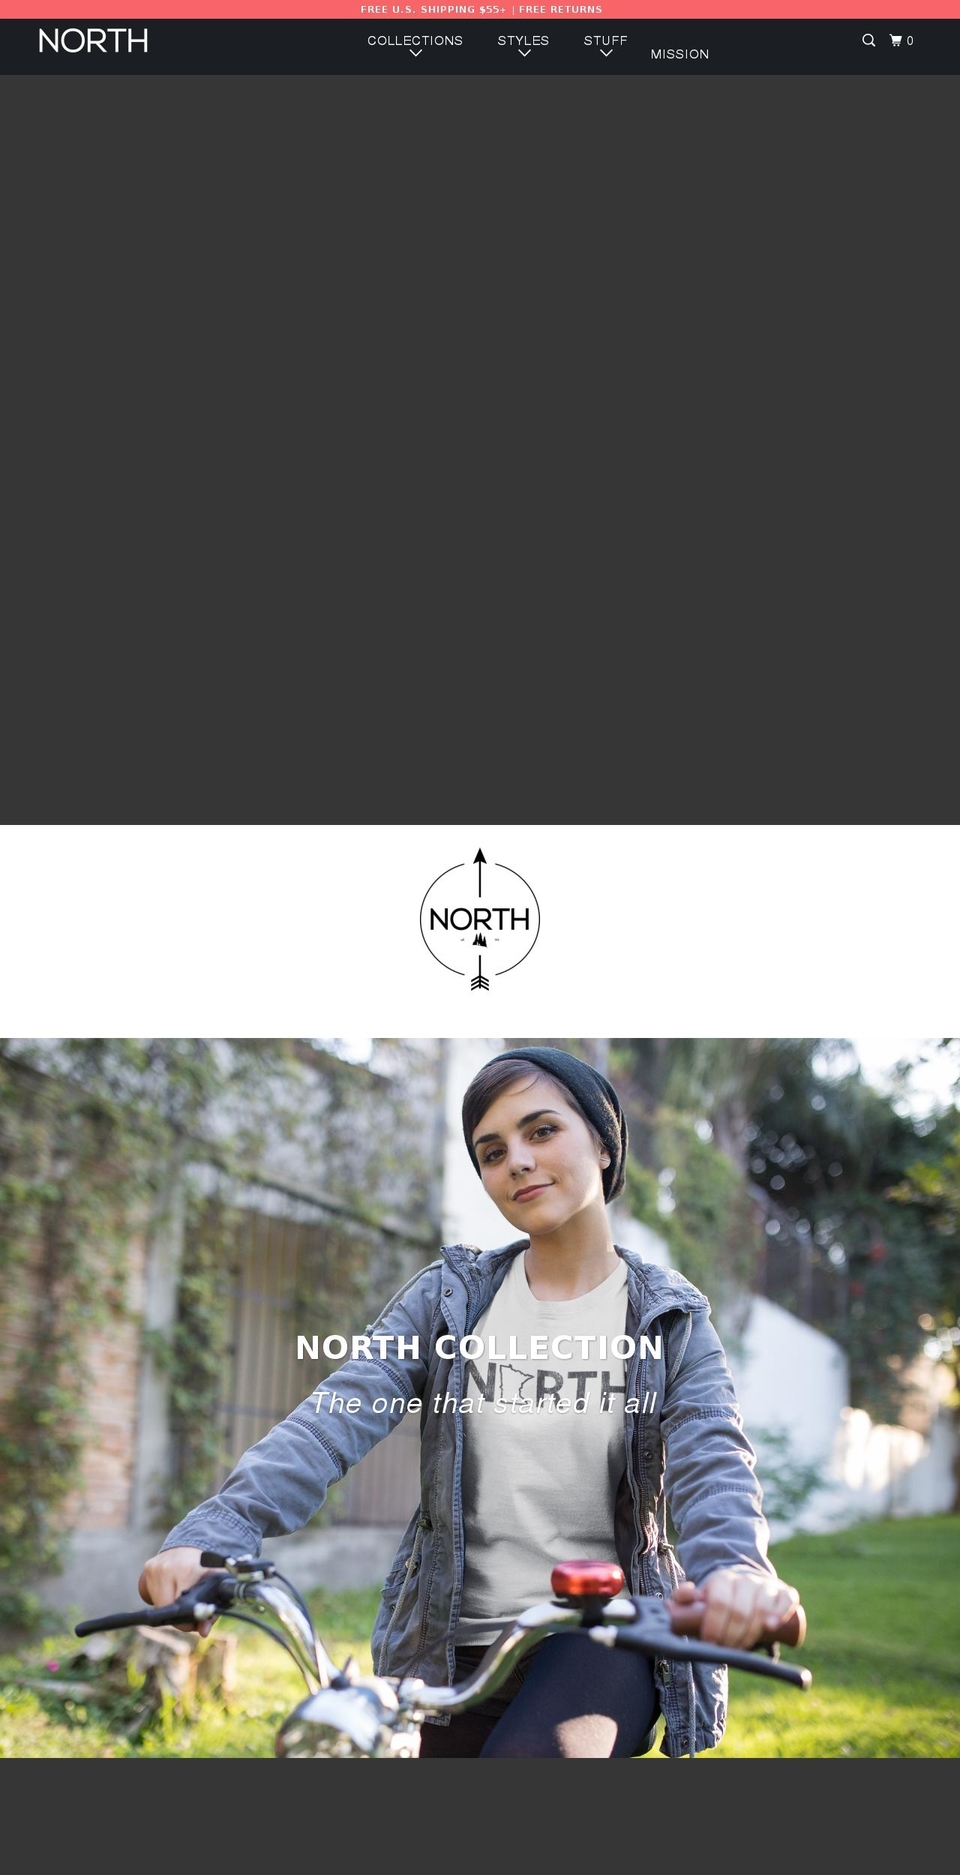 North Shopify theme site example north-mn.com